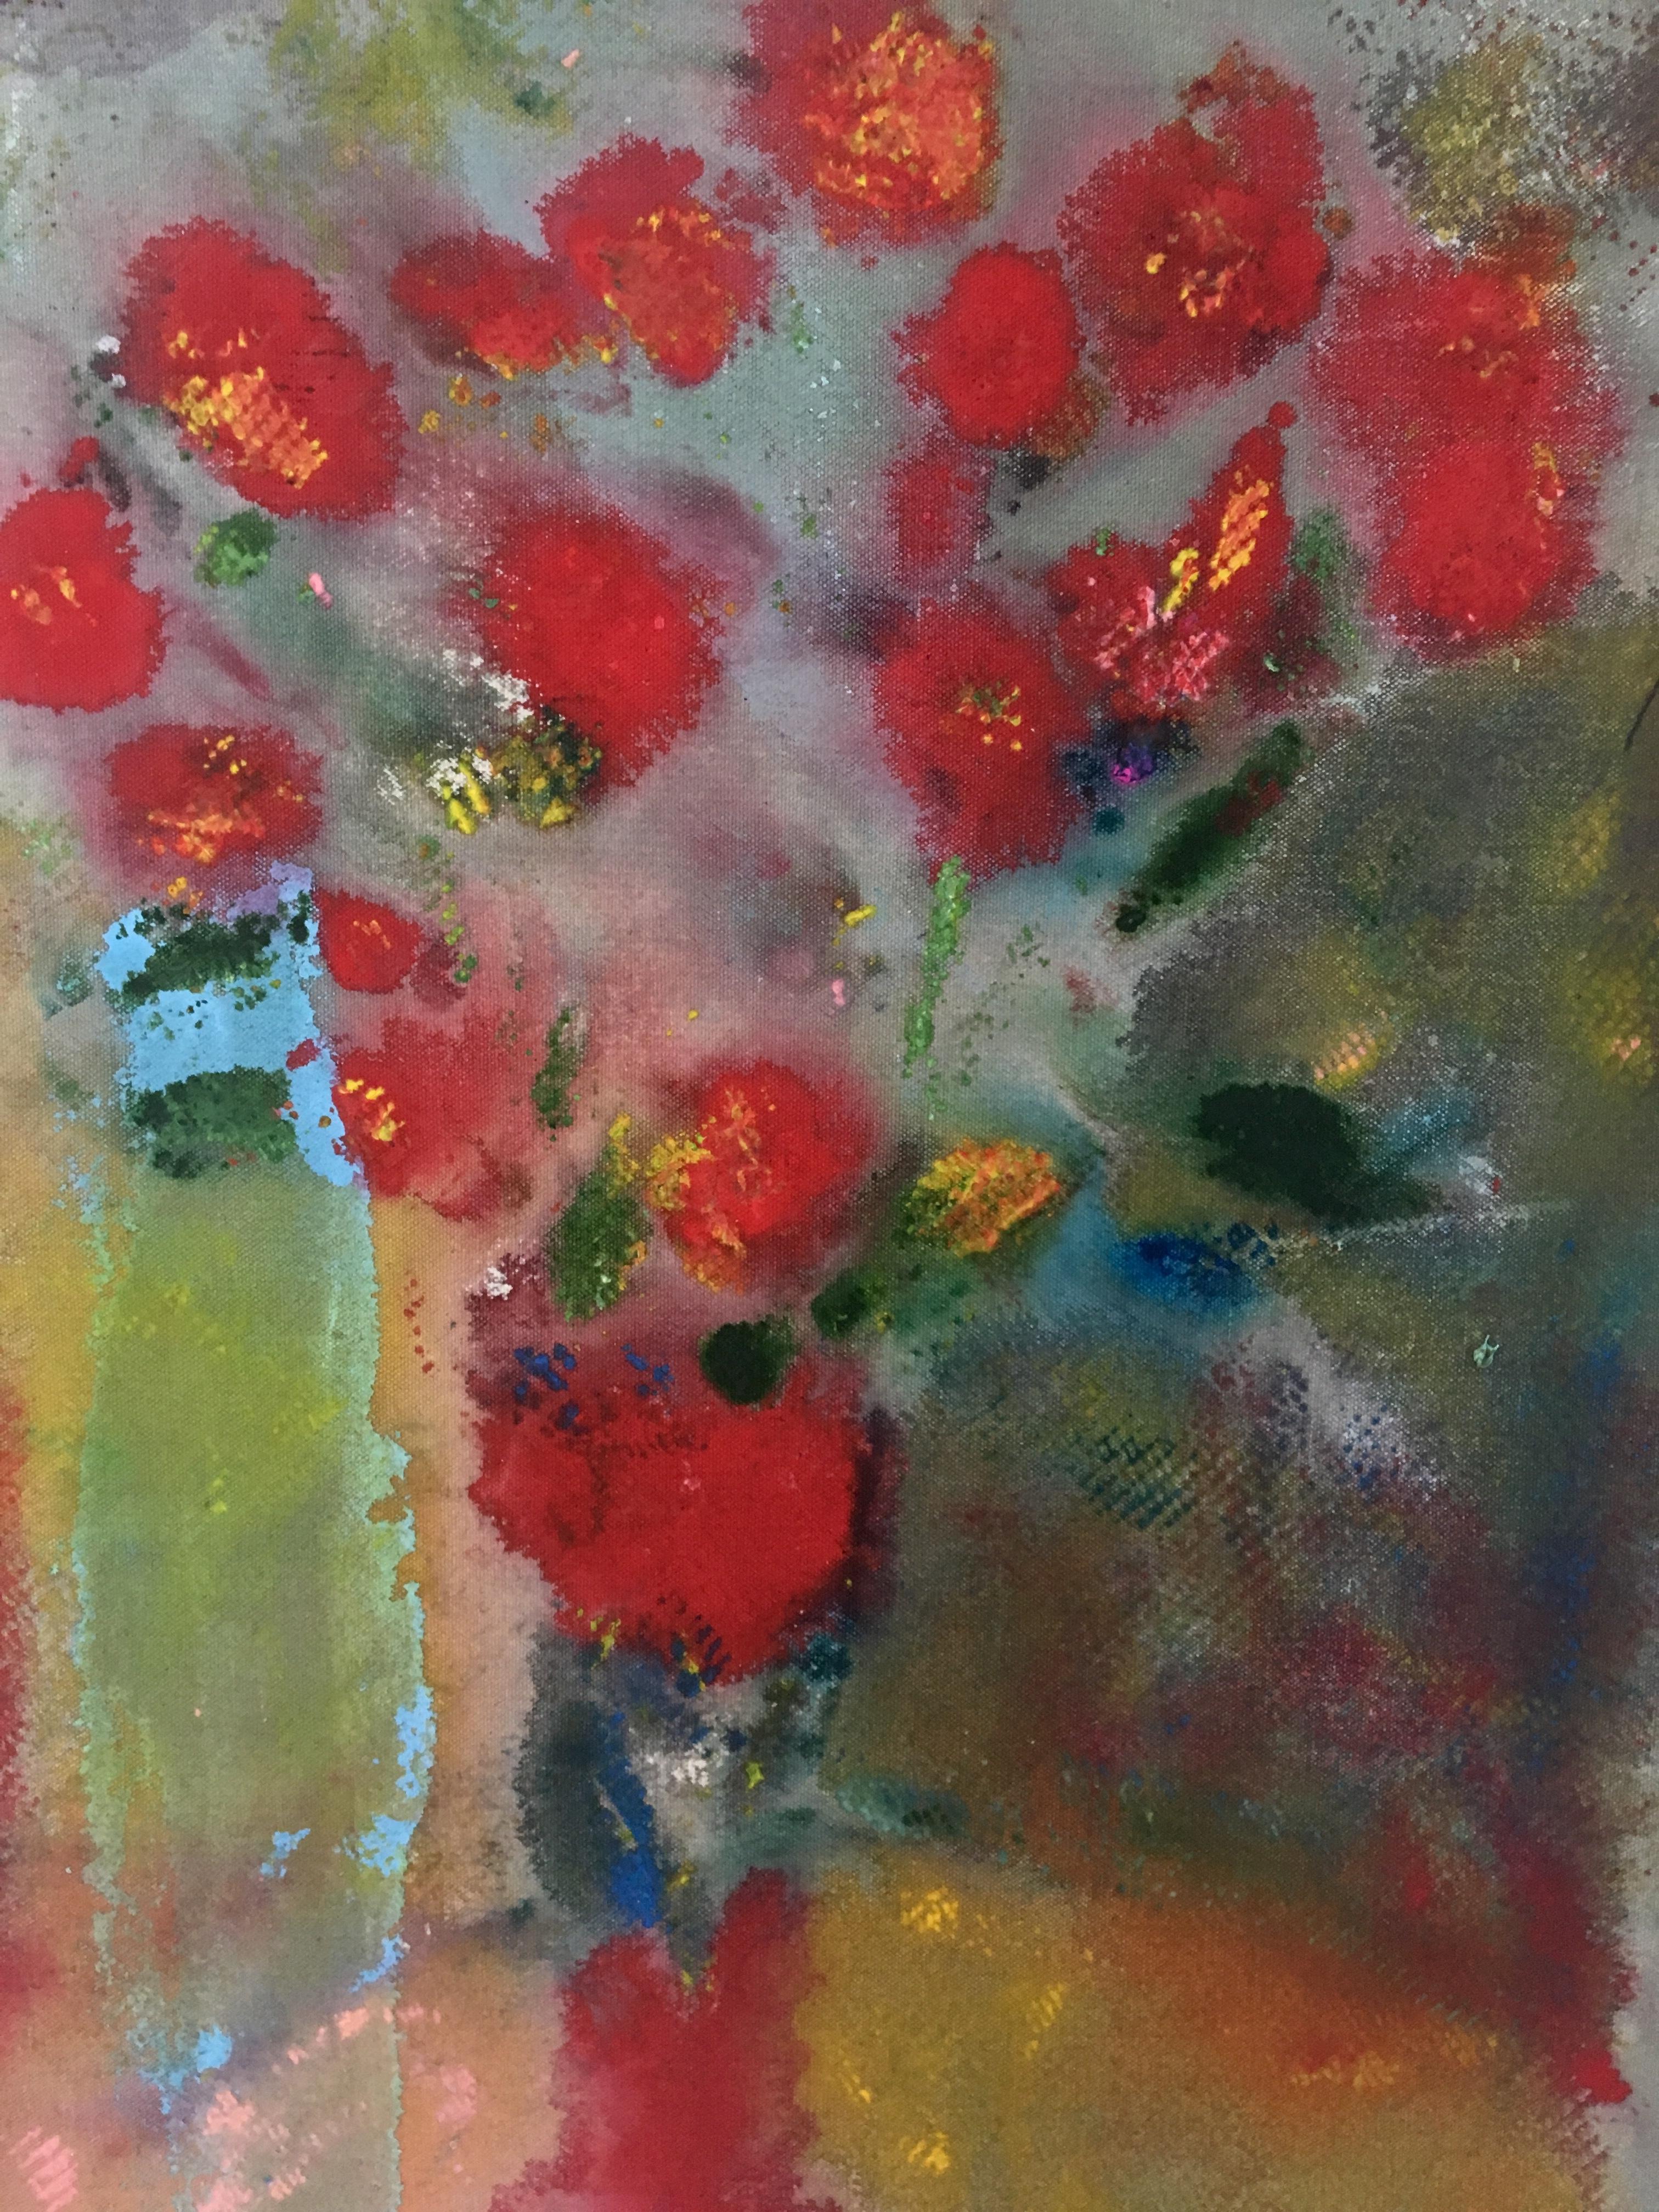 Painting of Bouquet of flowers on canvas : 'Red Pom Poms'